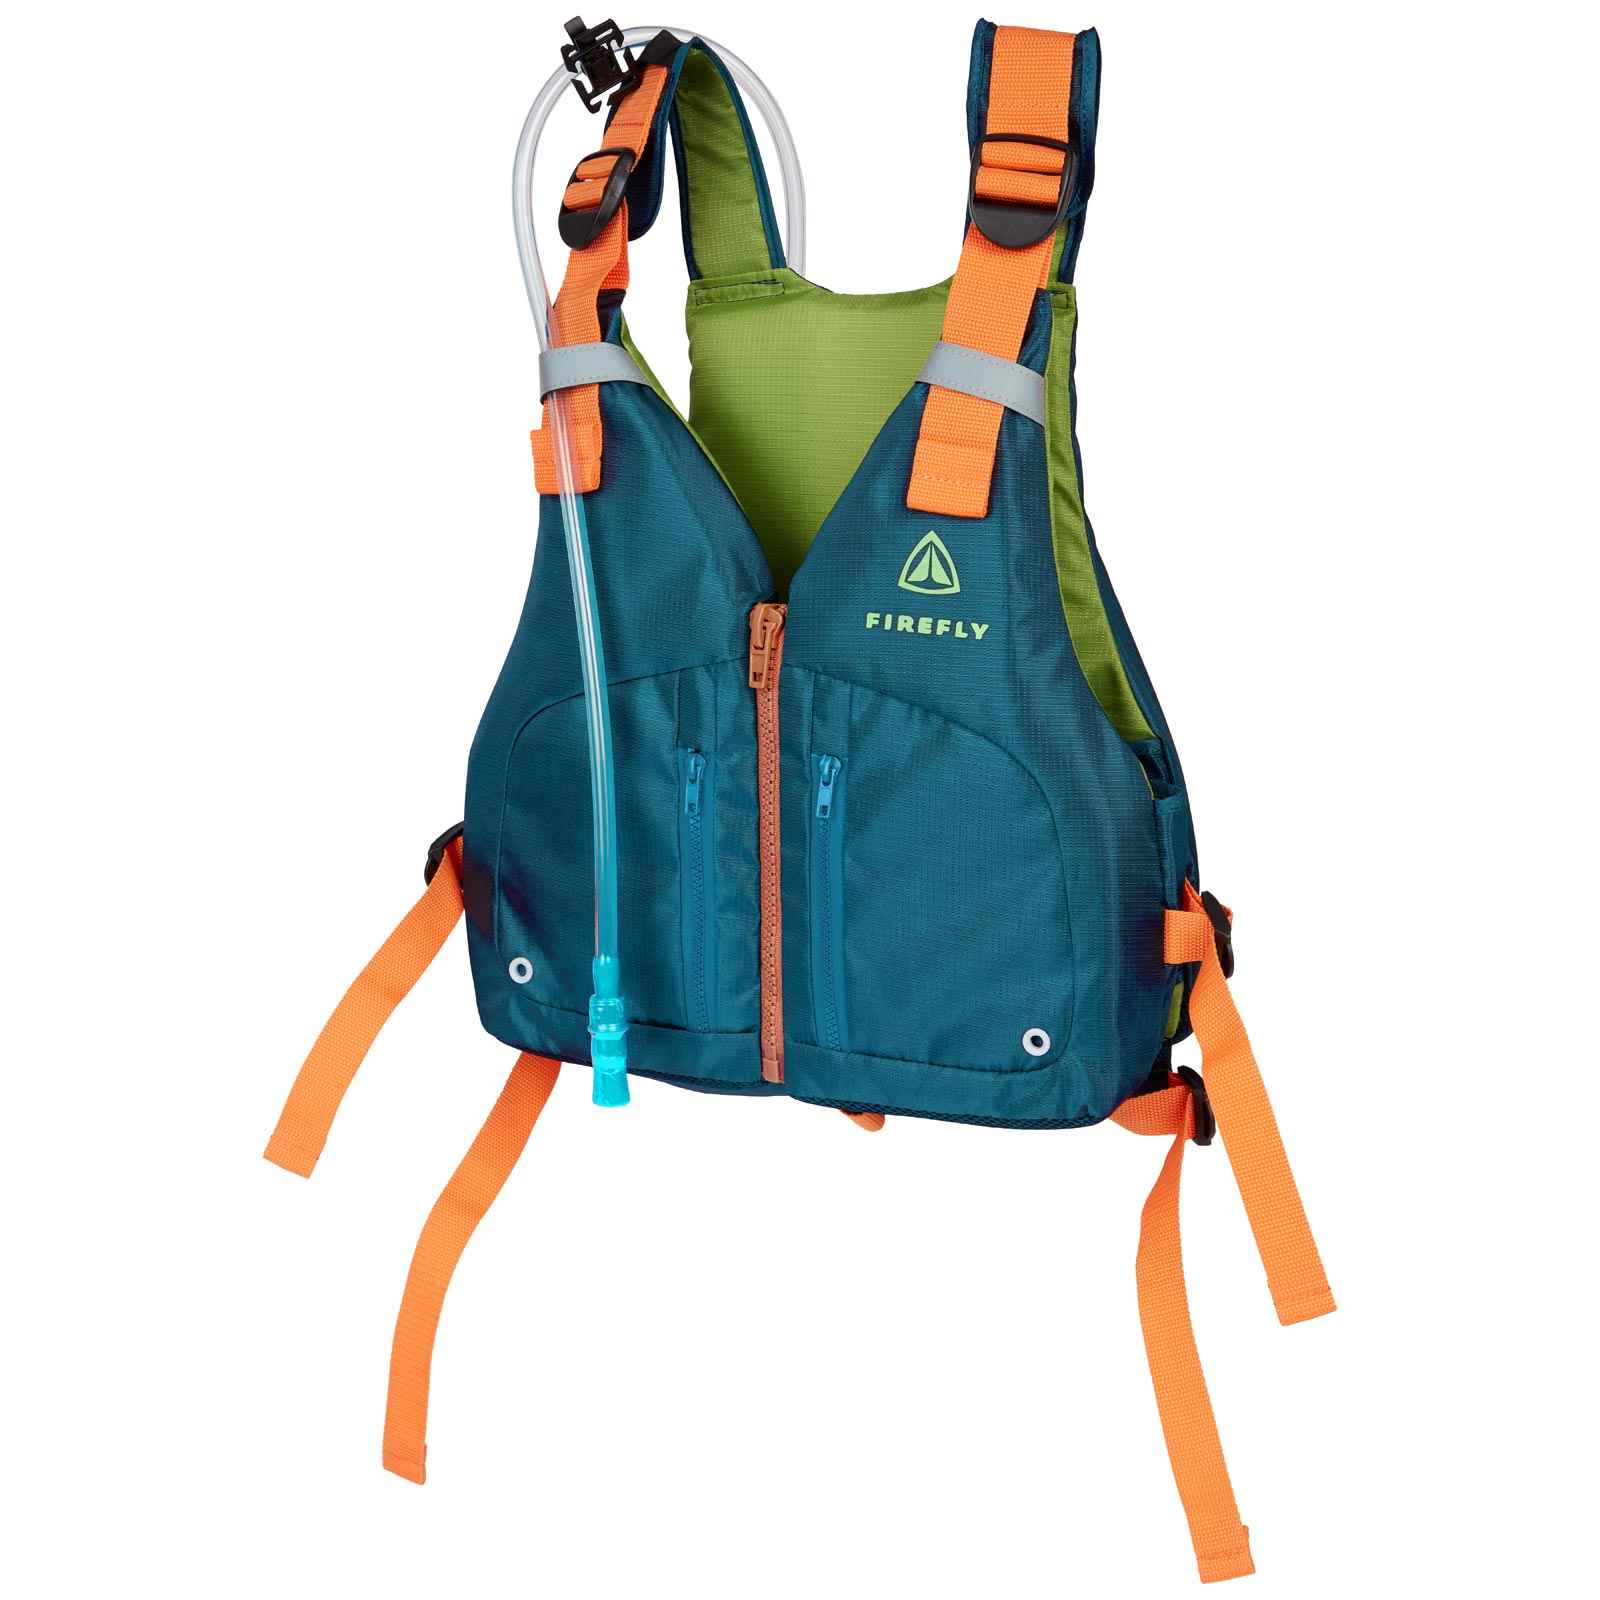 FIREFLY SUP TOURING VEST SWIMMING BUOYANCY AID